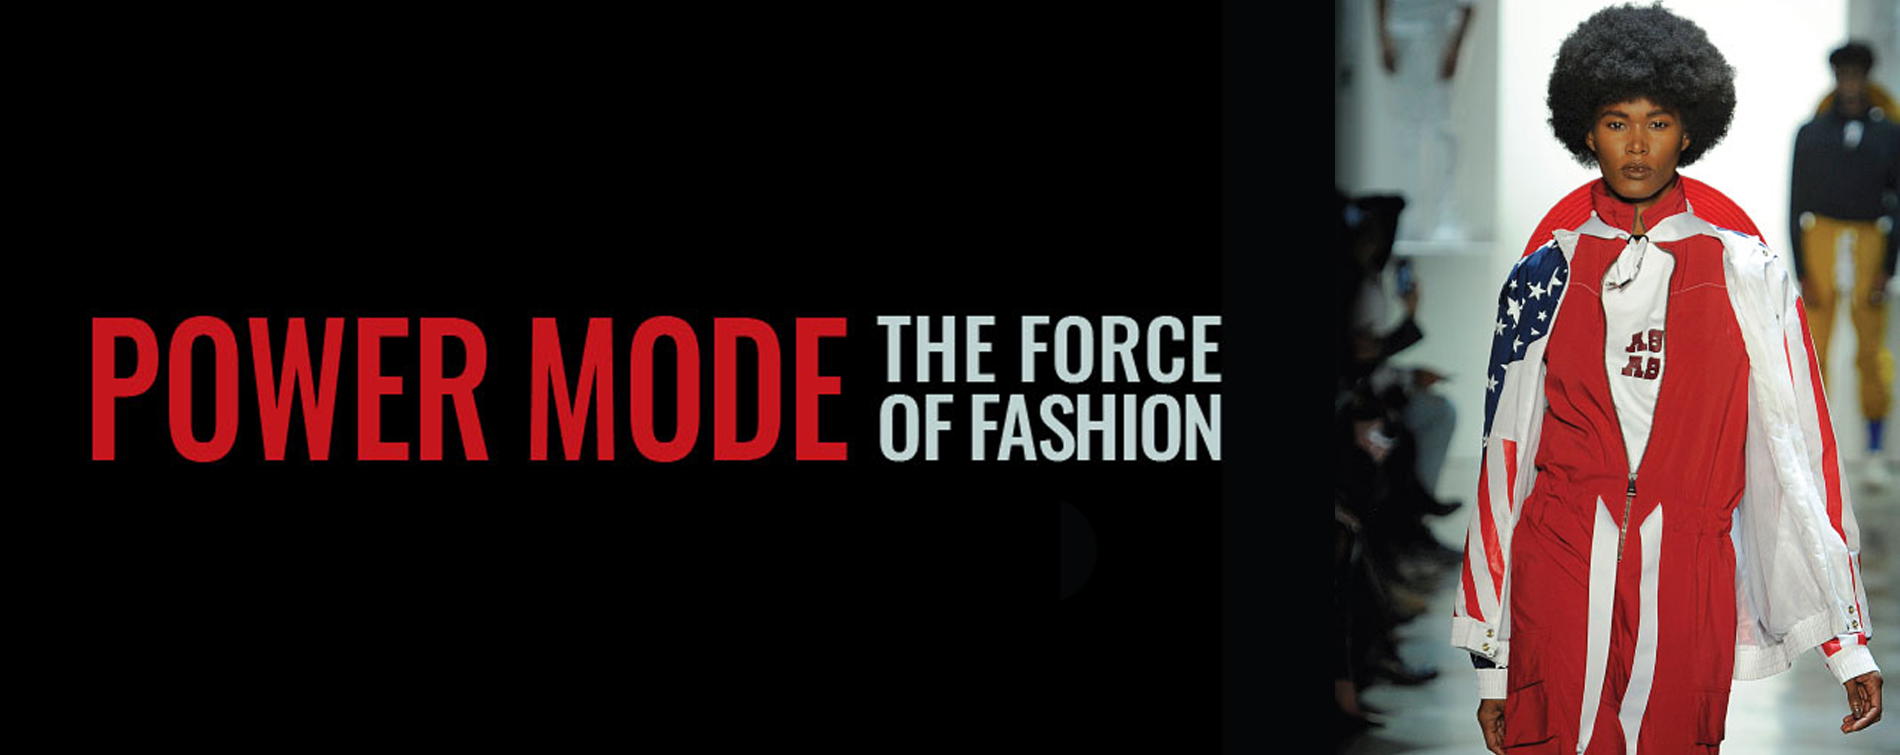 Power Mode: The Force of Fashion